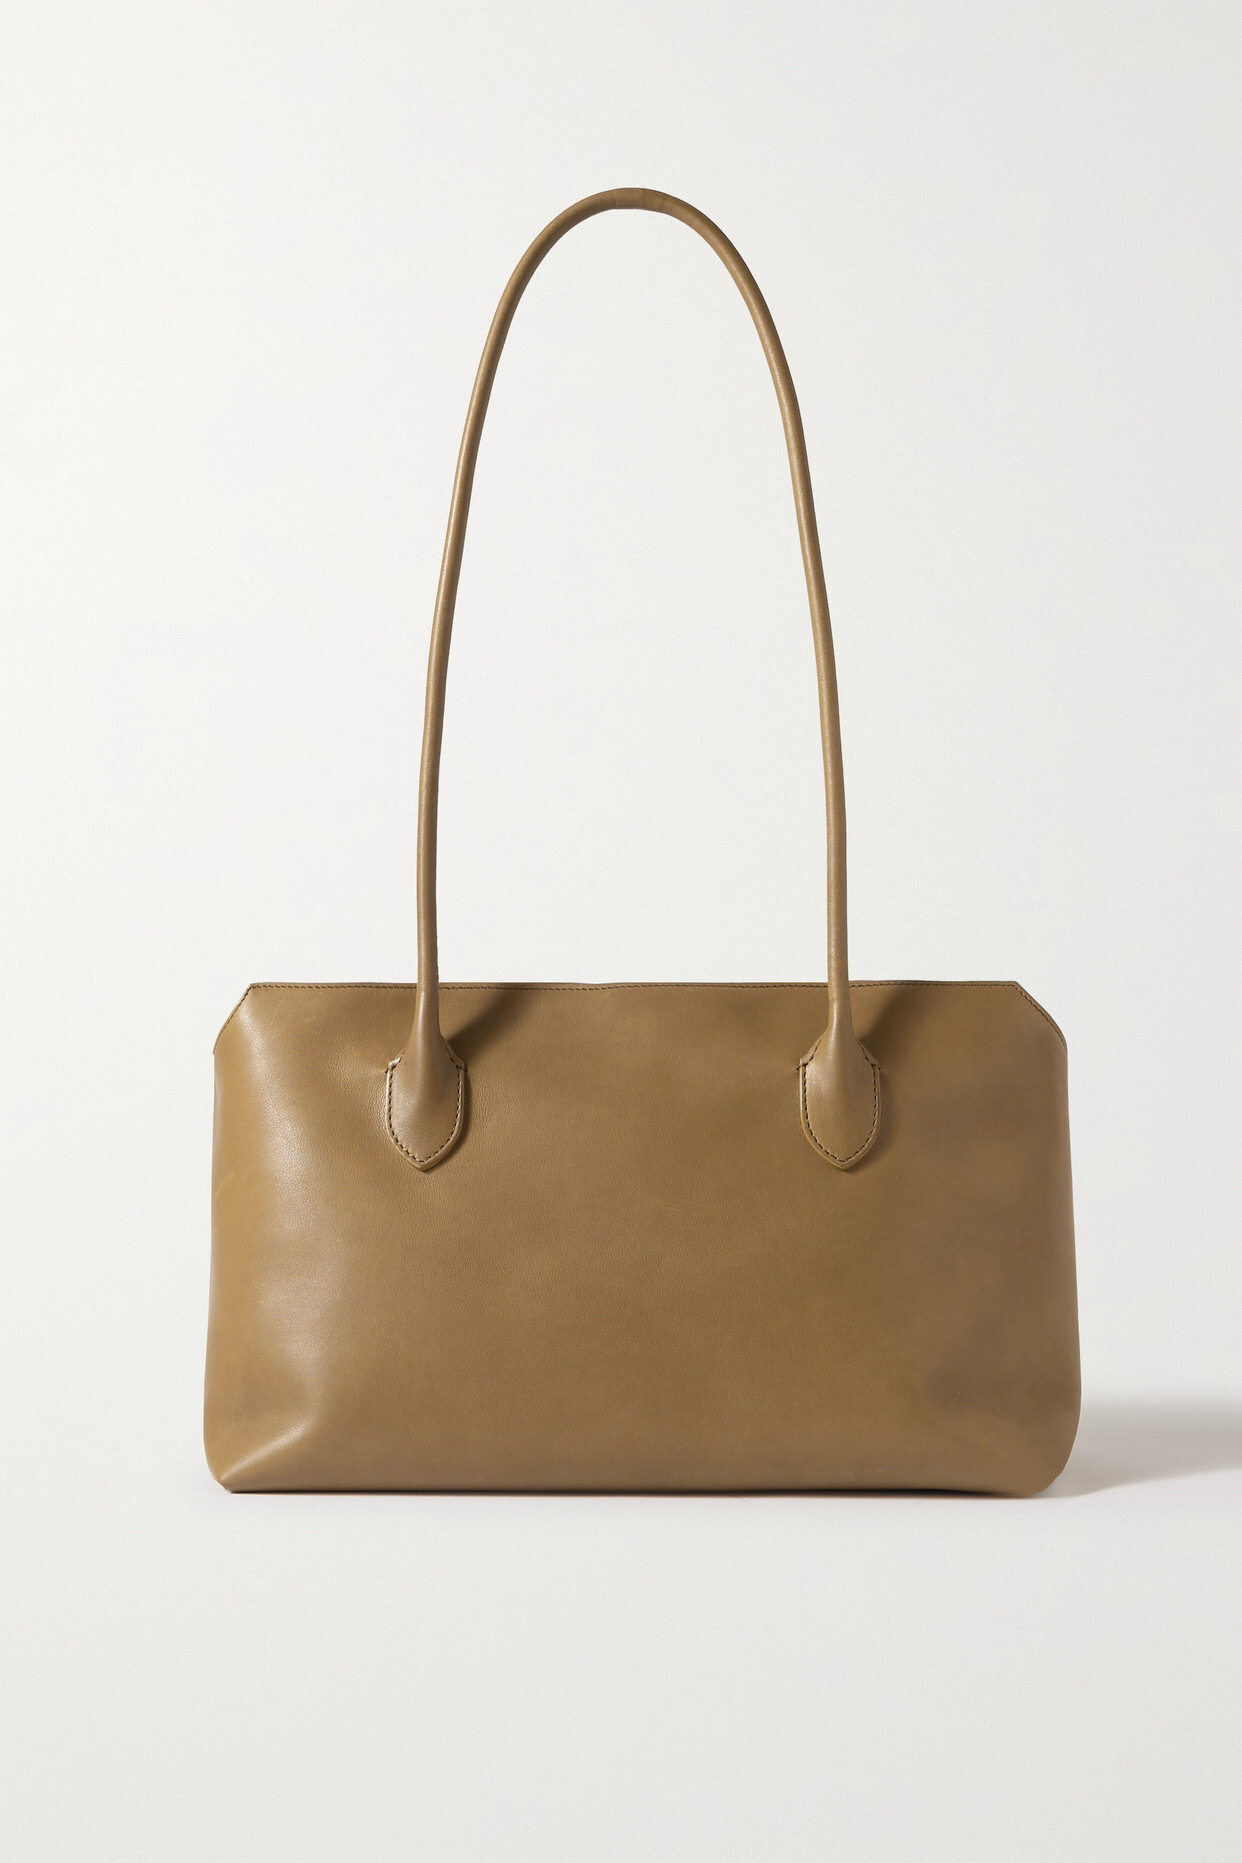 The Row - Terrasse Leather Tote - Brown